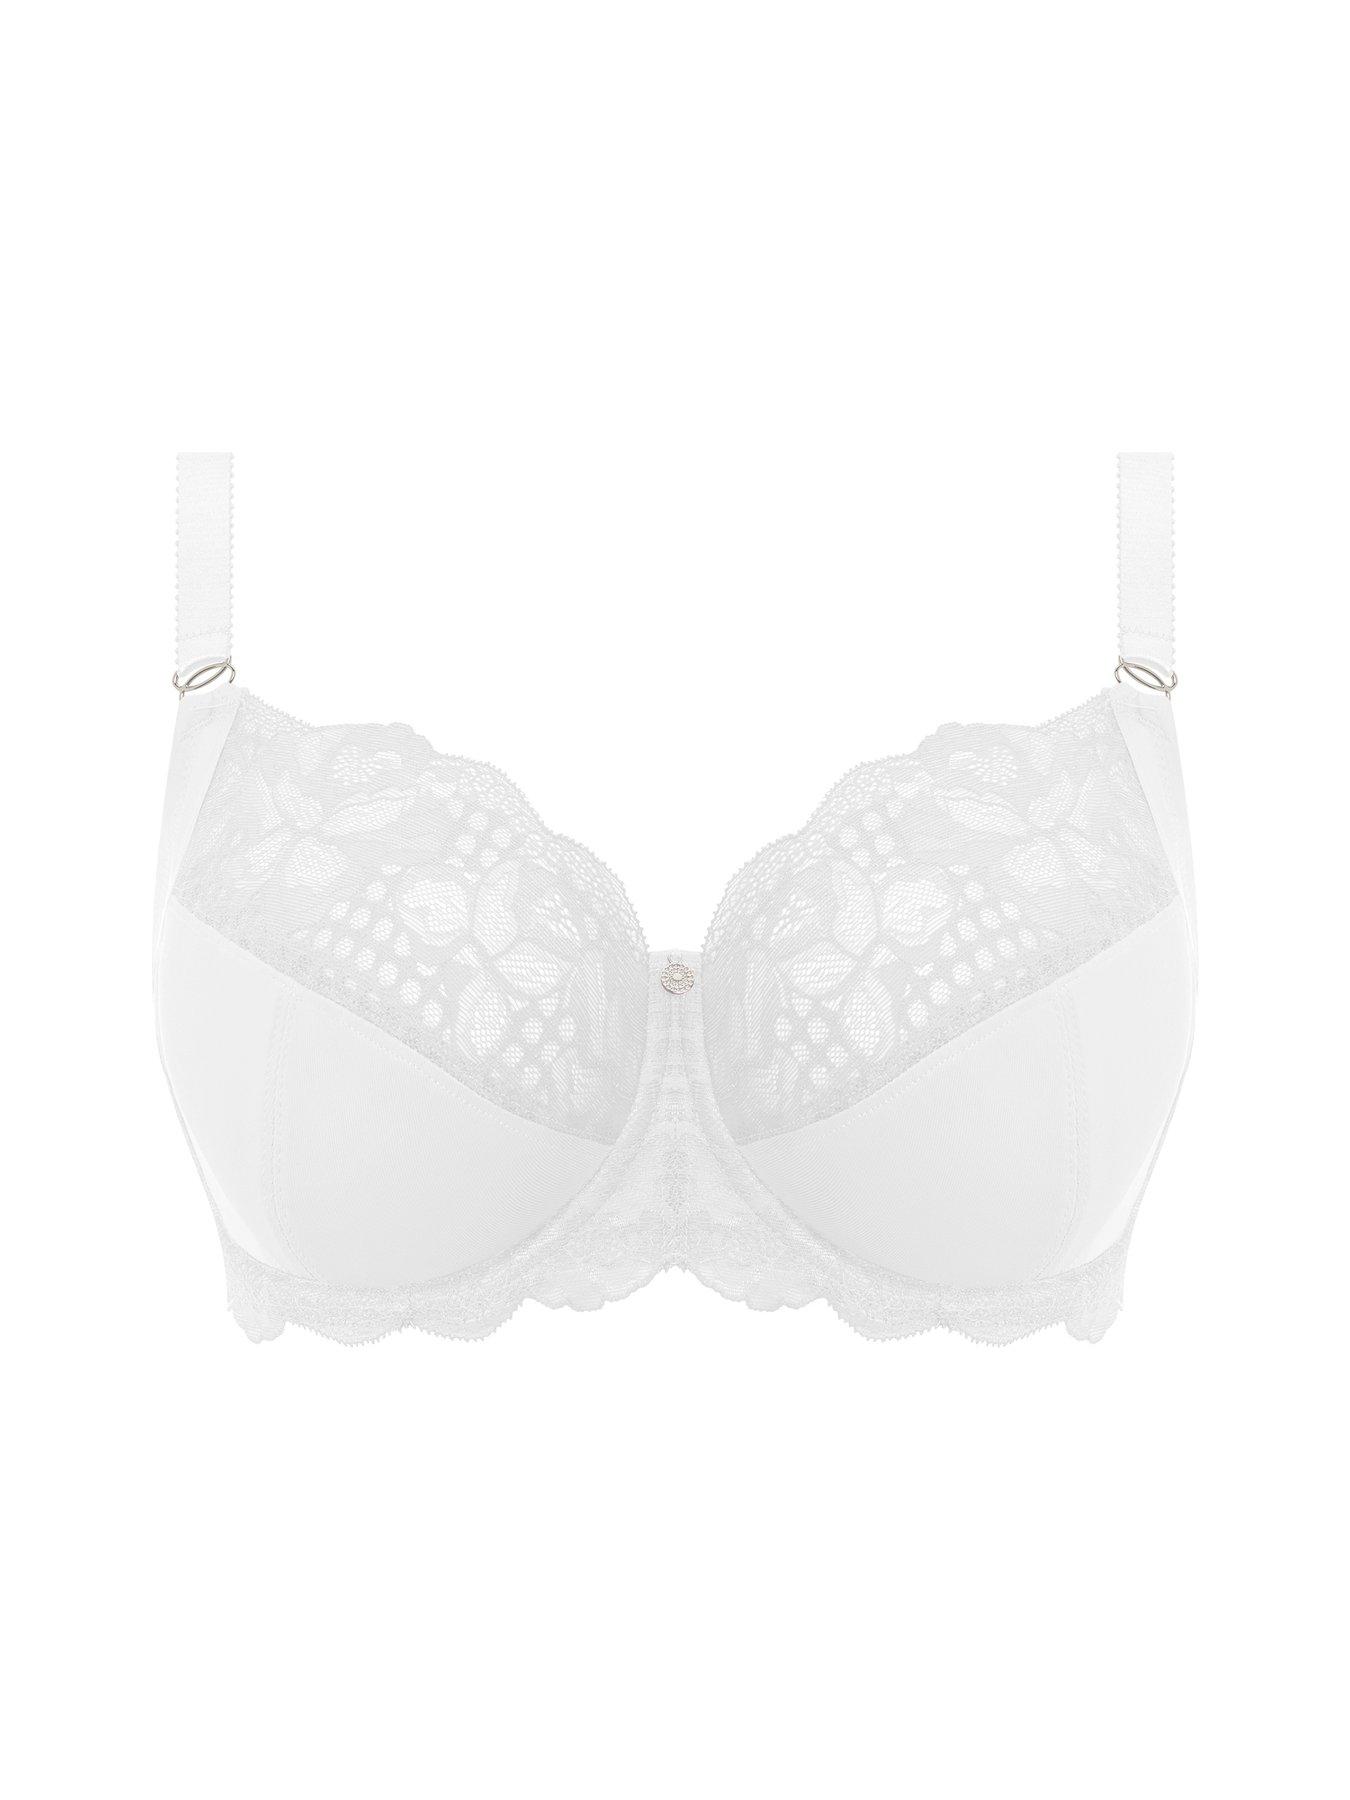 Lovely Lace Non Wired Cotton Bra with Padded Side Support - White